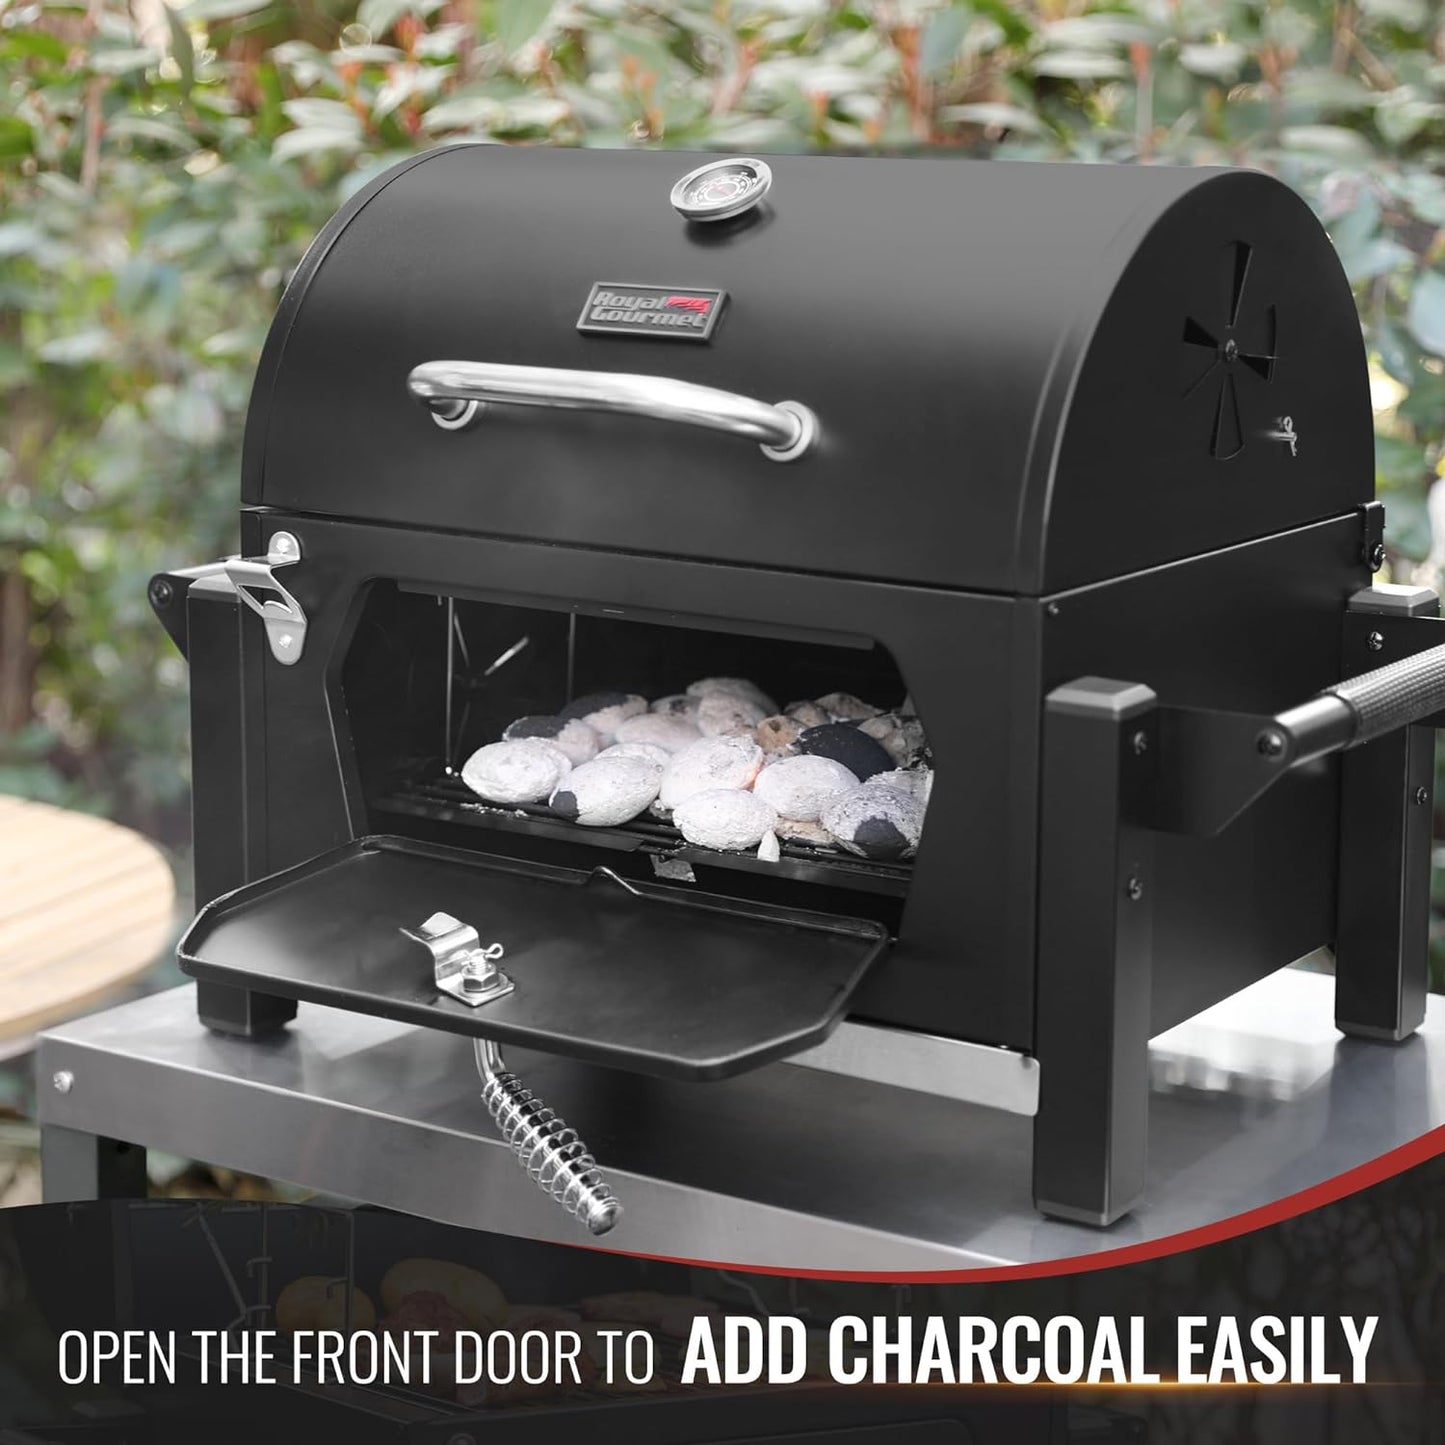 Royal Gourmet CD1519 Portable Charcoal Grill with Two Side Handles, Compact Outdoor Tabletop Charcoal Grill with Bottle Opener, for Travel Picnic Tailgate and Campsite BBQ Cooking, Black